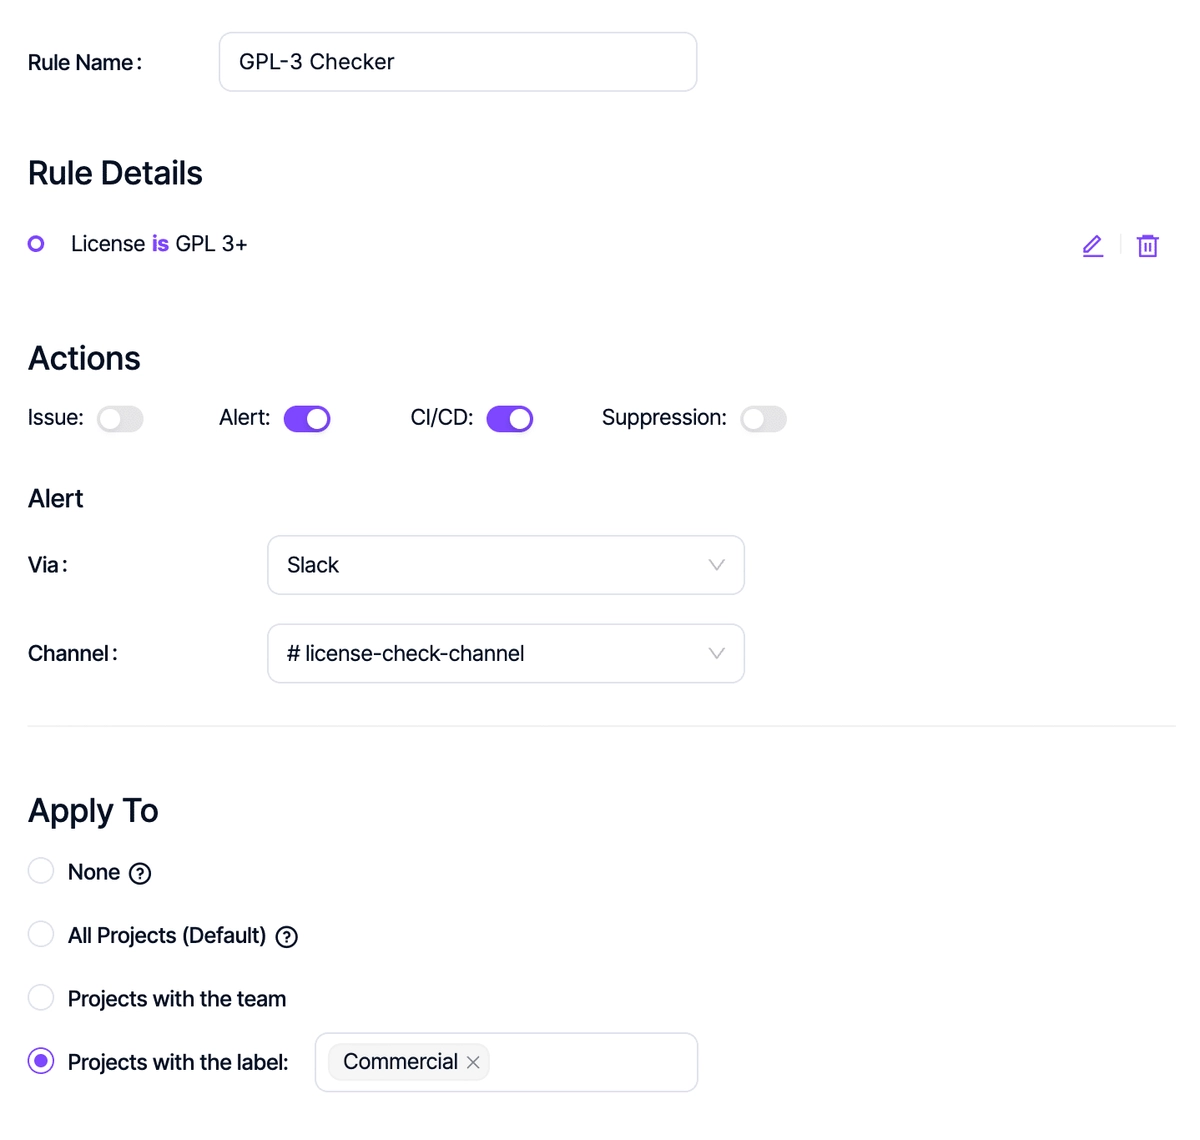 Workflow Automations to monitor, inform and take action